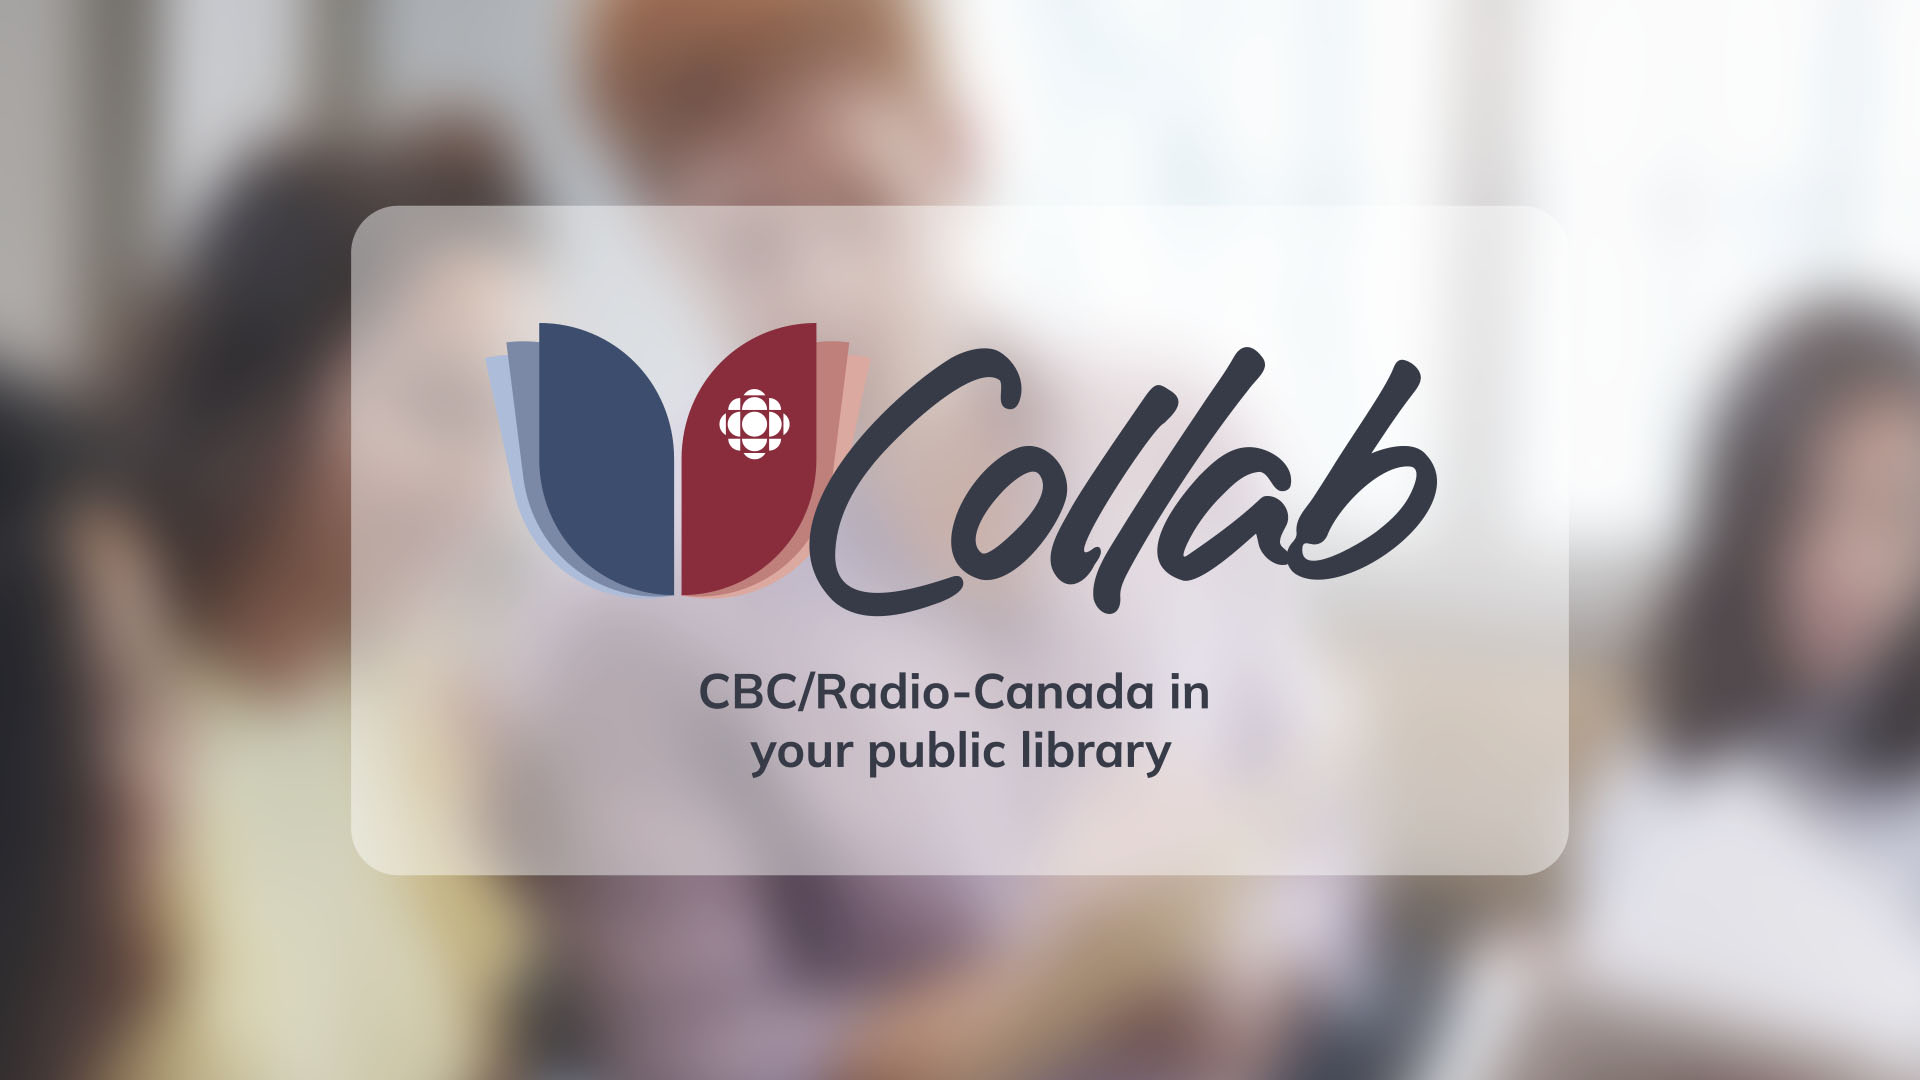 Collab logo – CBC/Radio-Canda in your public library